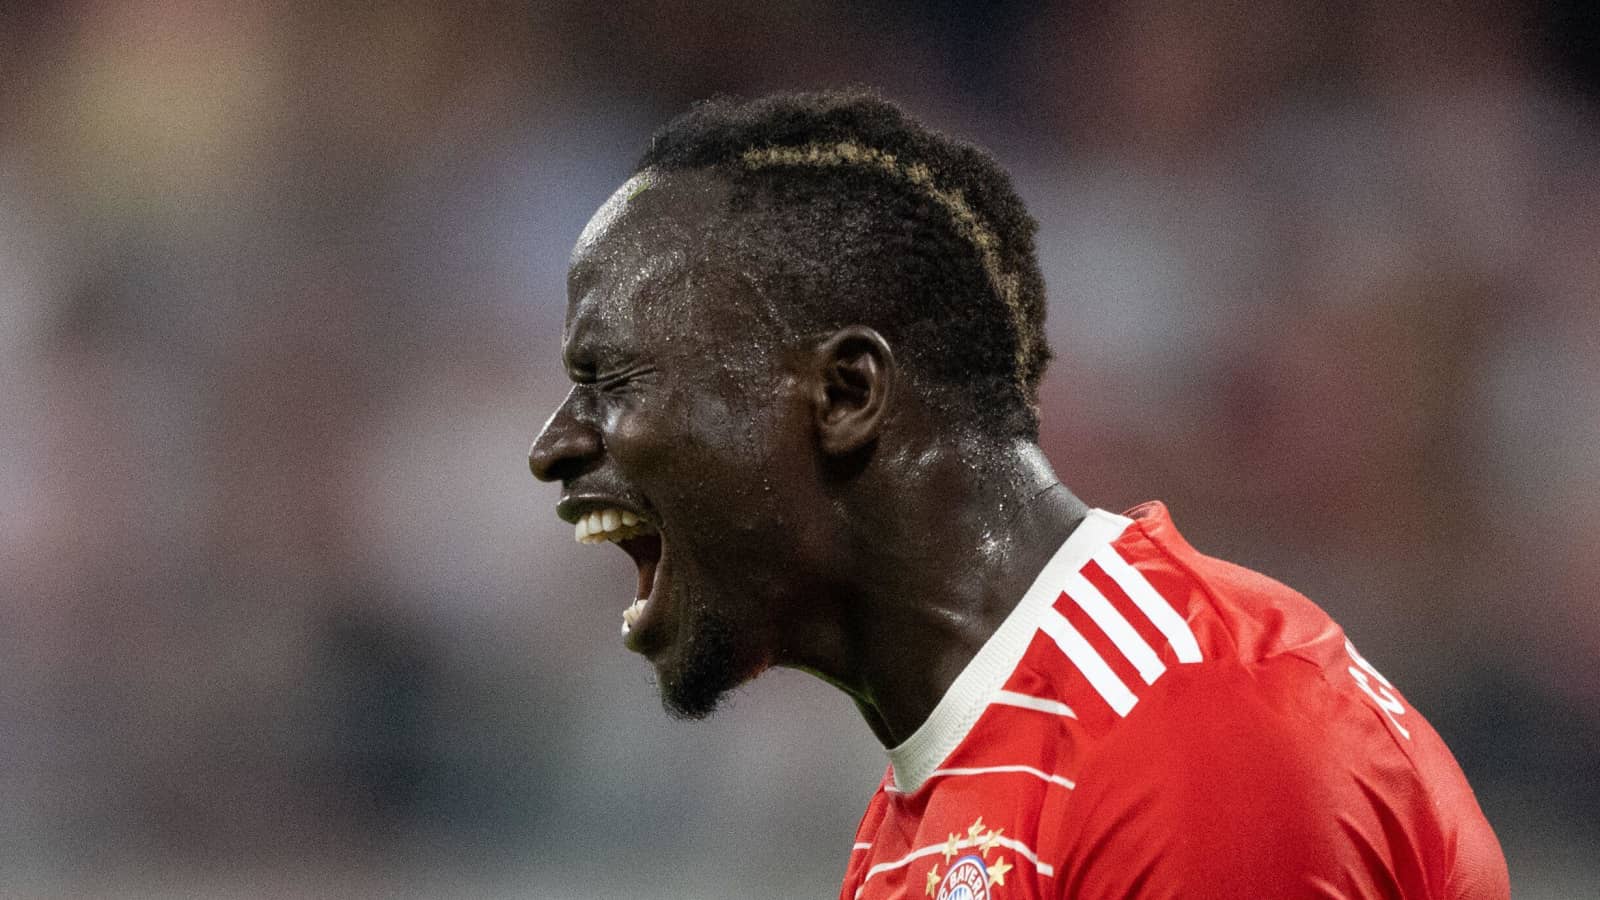 Sadio Mane Told How Bayern Munich Career Can Be Salvaged, As Signs Start Pointing Towards Ex Liverpool Star's Early Exit